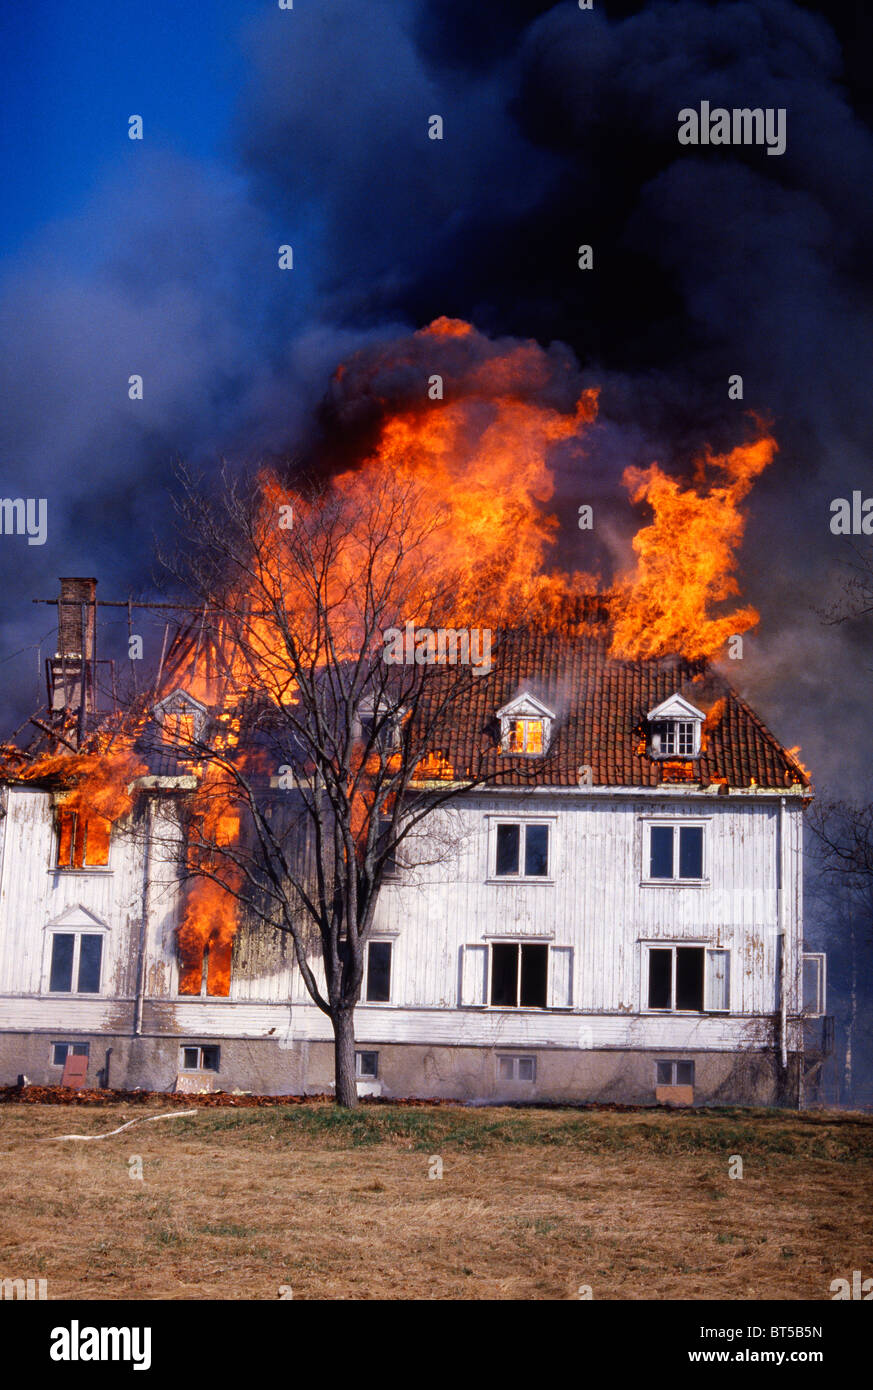 The old building is engulfed in flames as the fire moves rapidly. The fire claimed the house which was a total loss. Stock Photo